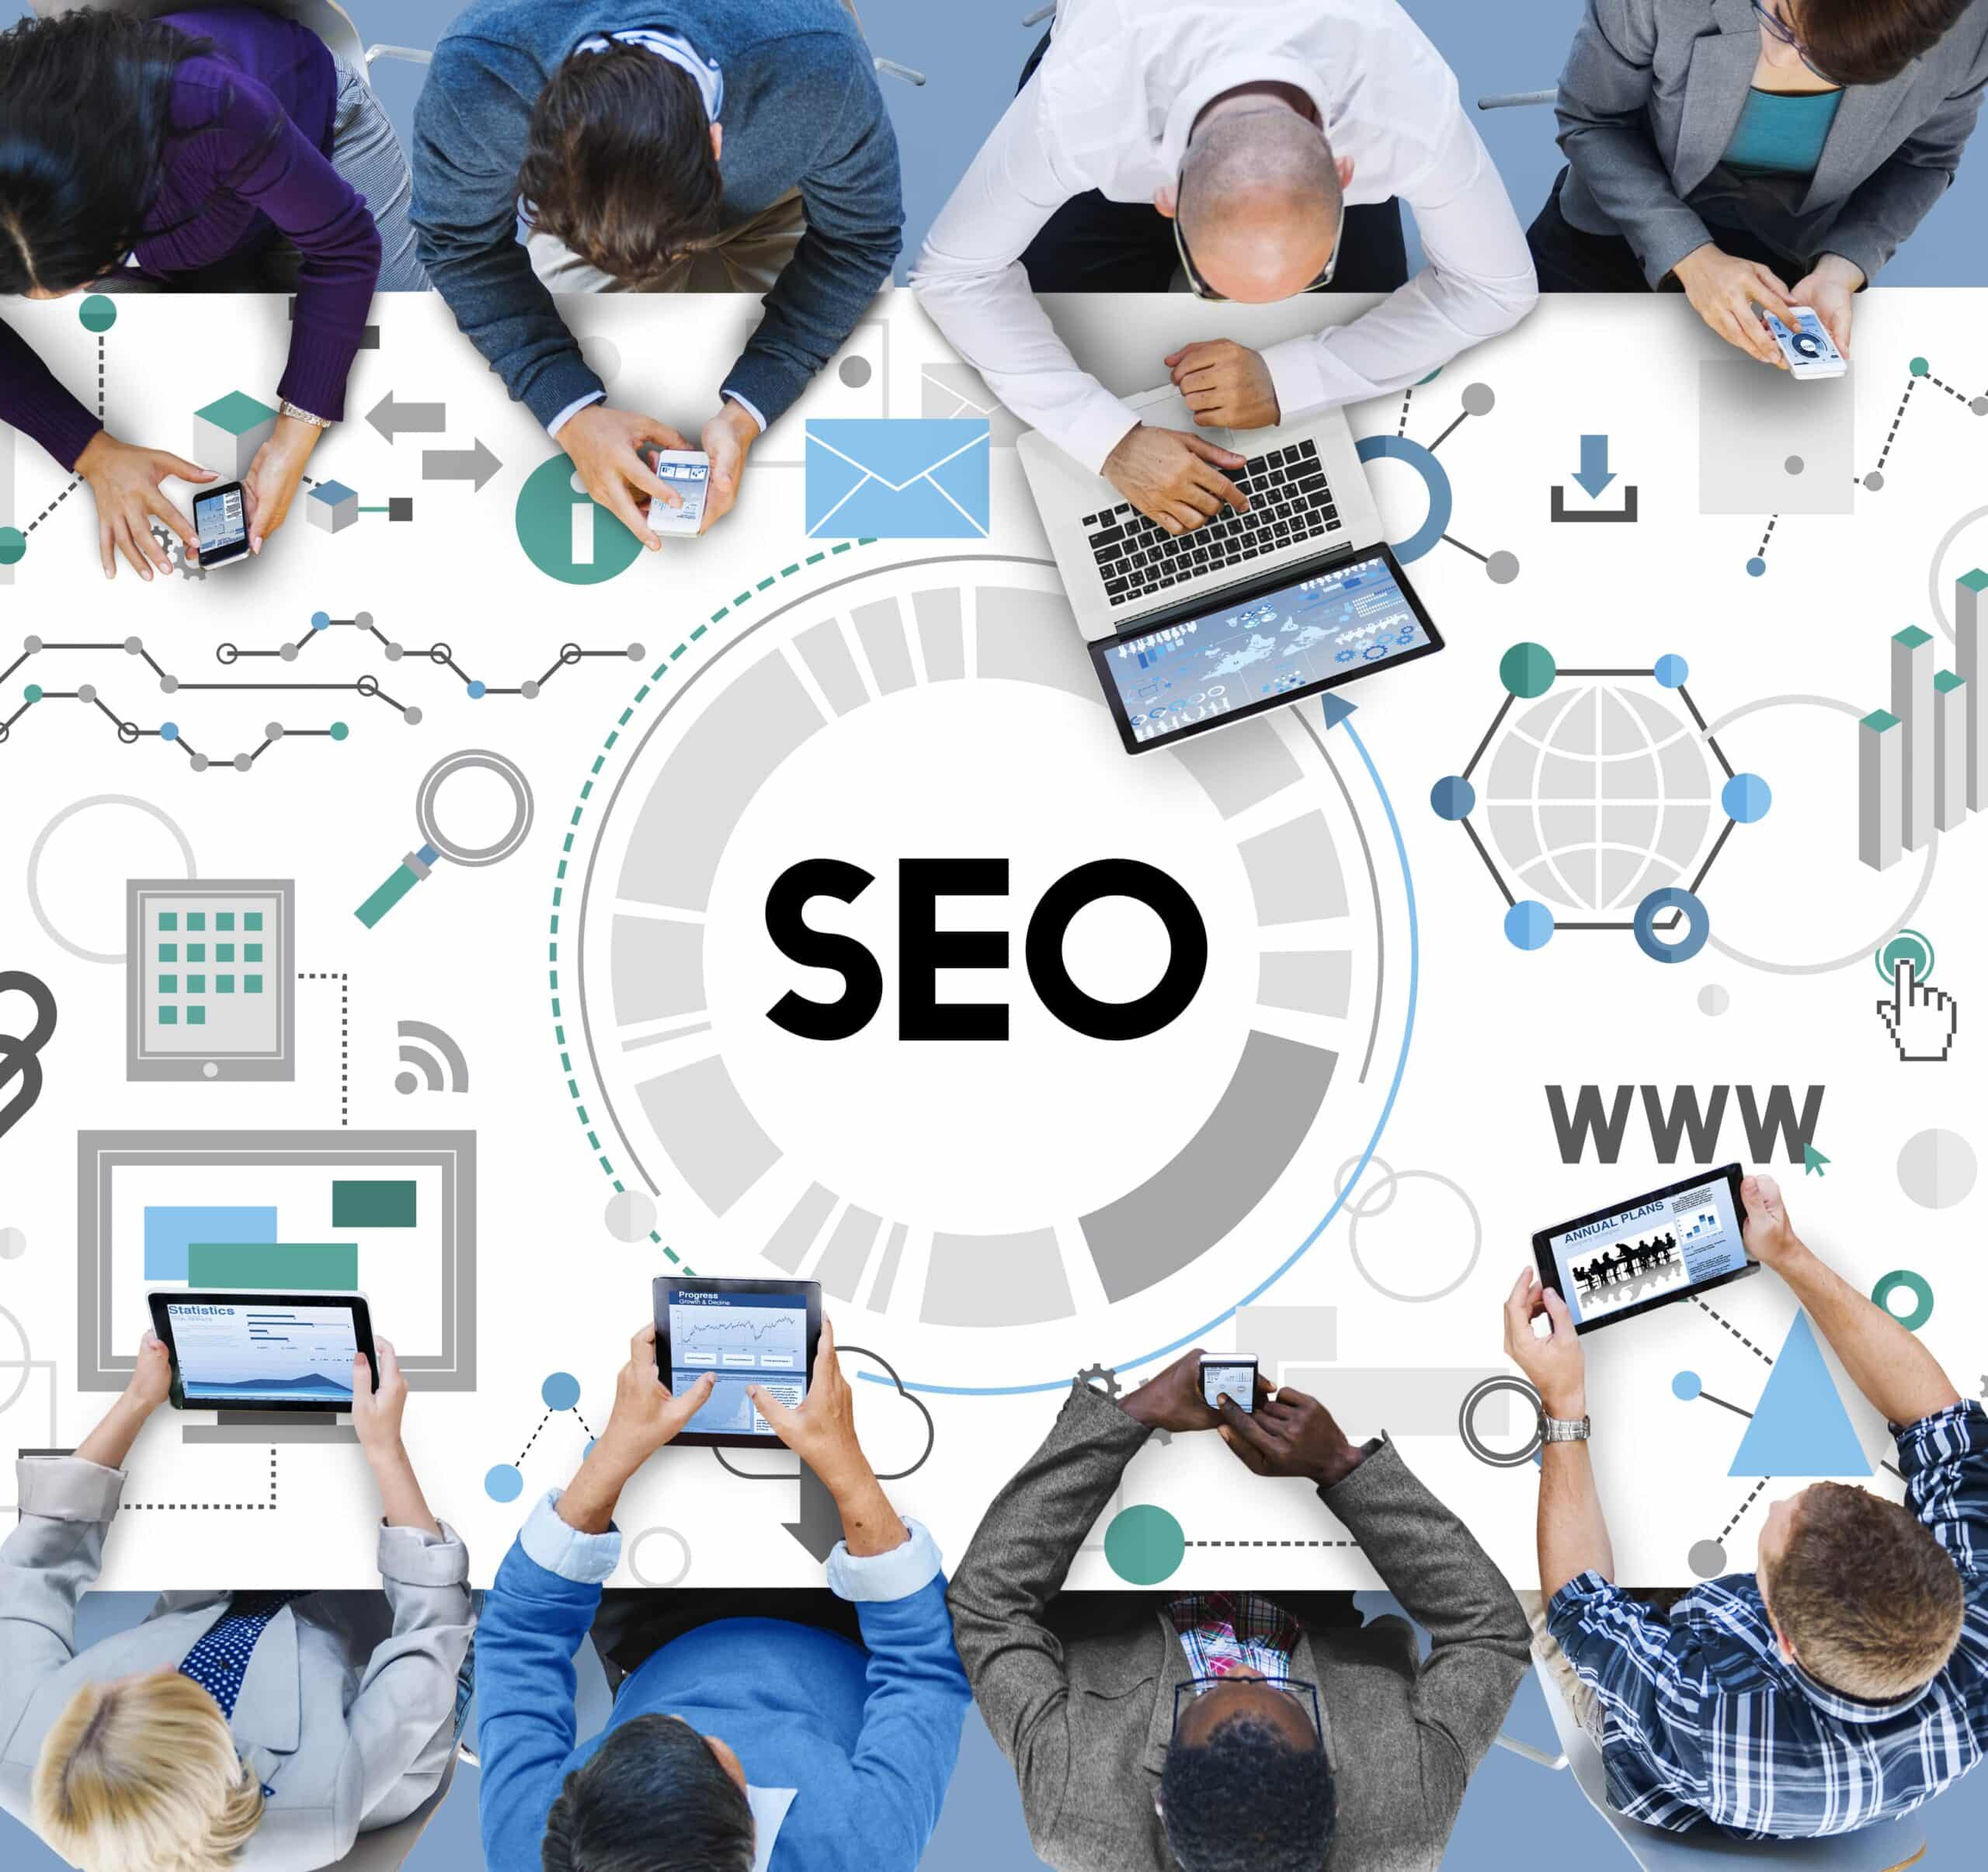 Top Search Engine Optimization (SEO) Trends for 2022